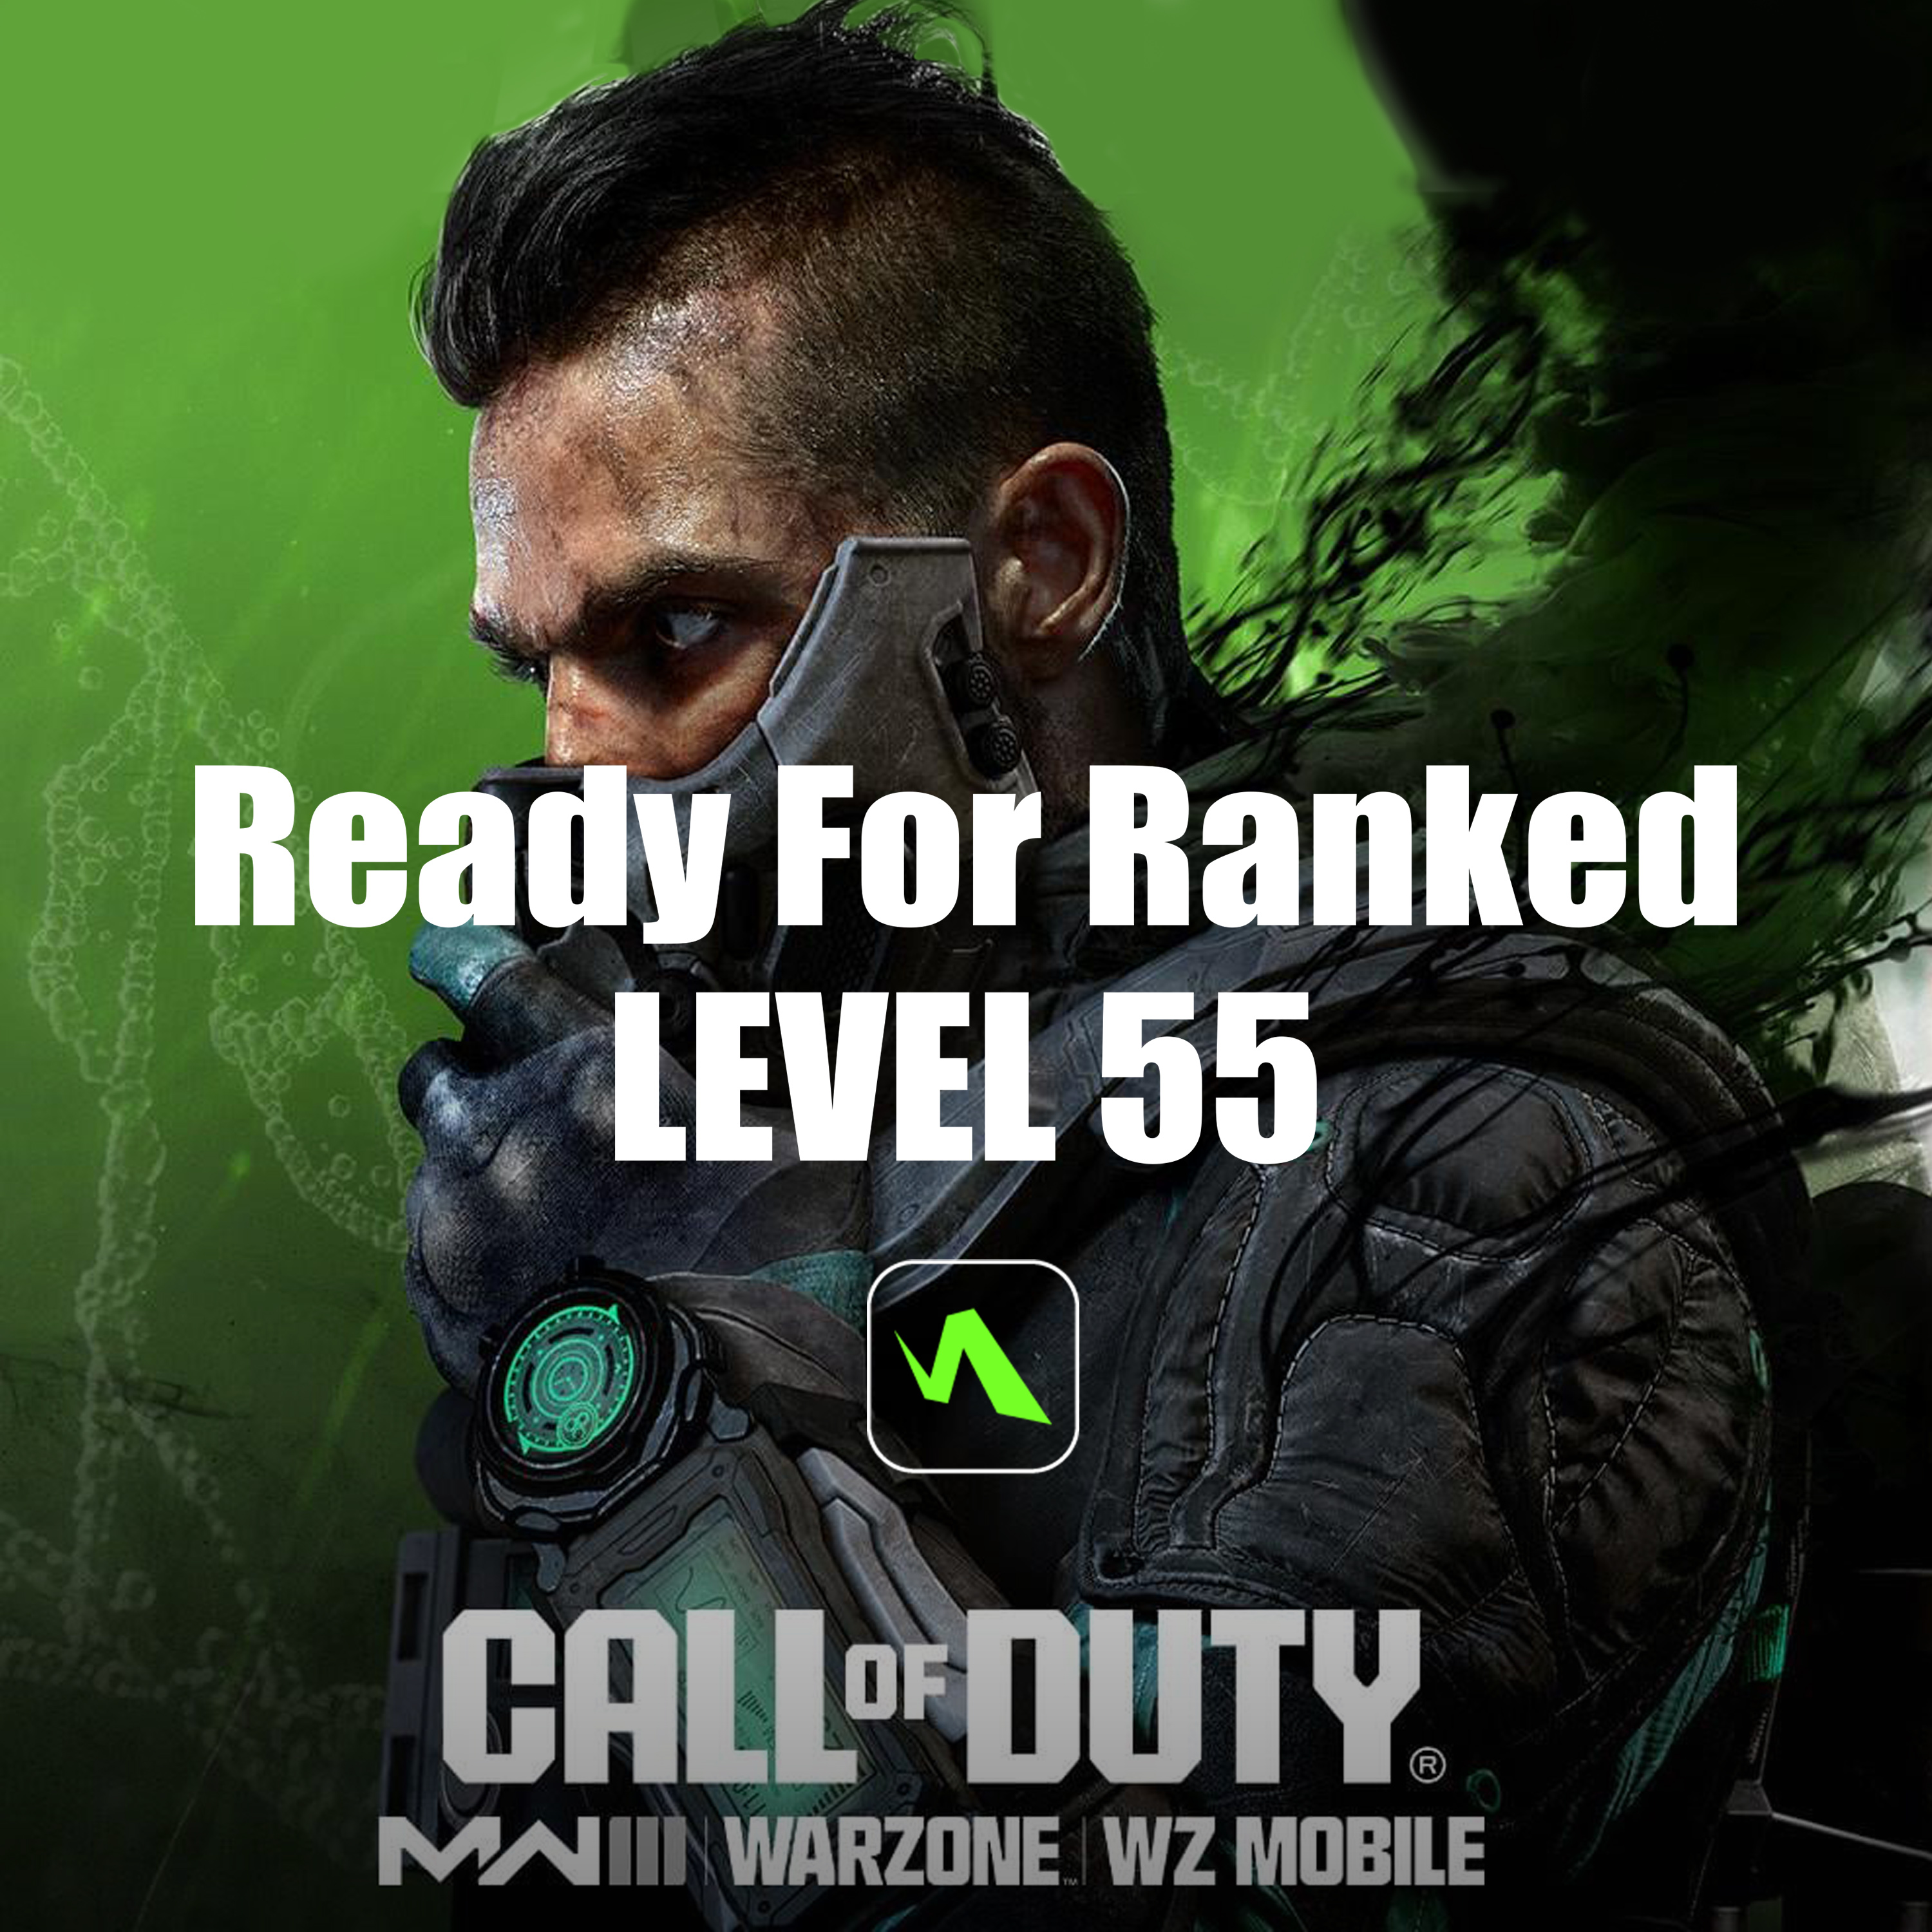 Call Of Duty WARZONE 4 | LEVEL 55 | Read For Ranked | BATTLE.NET | ACTIVISION FULL ACCESS | FAST DELIVERY